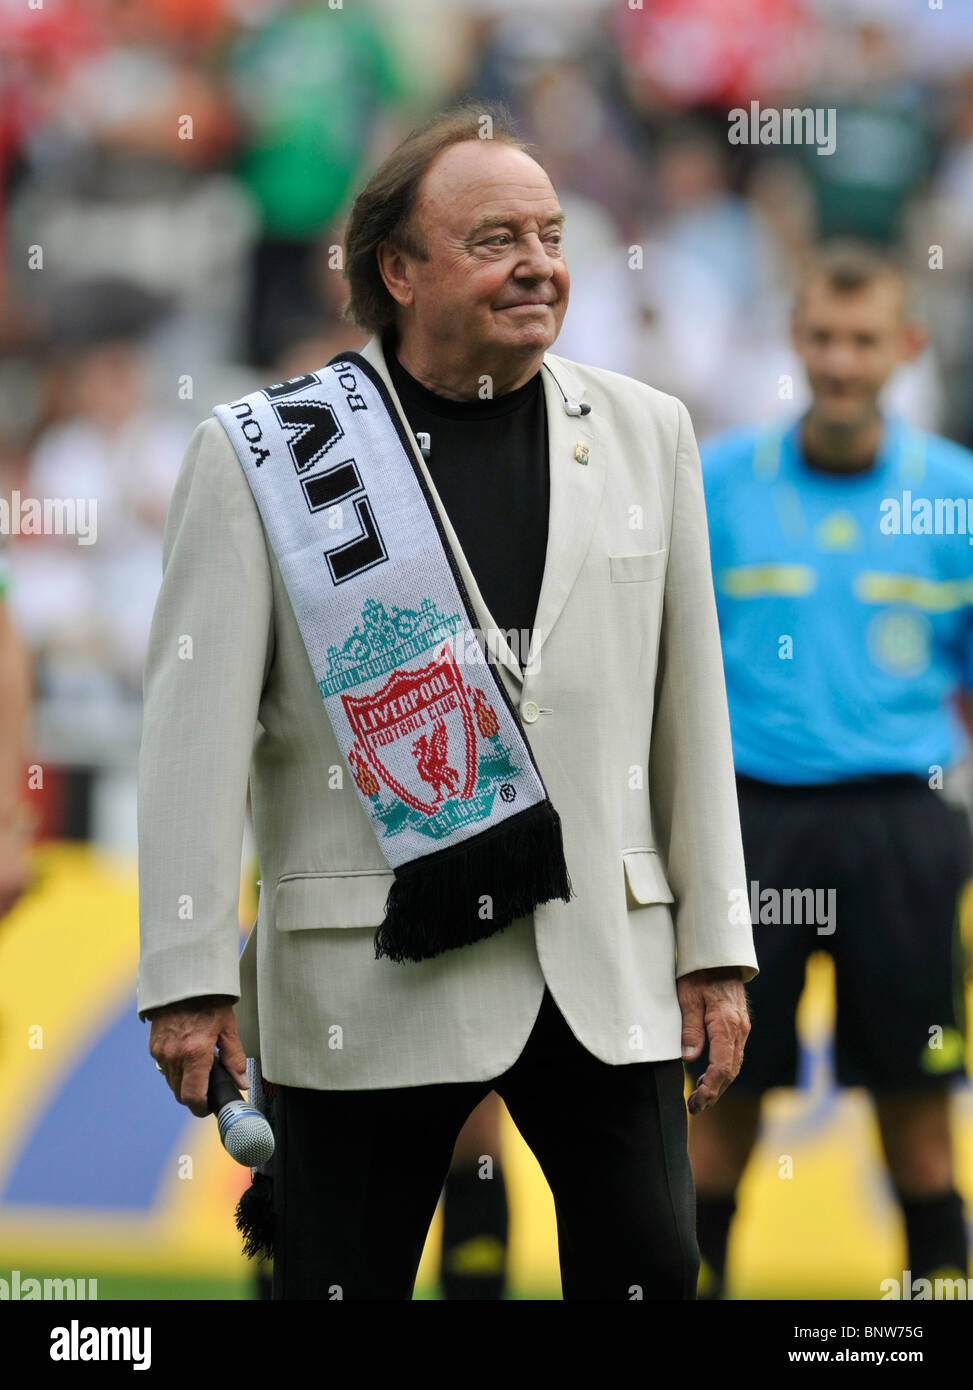 Borussia Park Moenchengladbach Germany, 01.08.2010, Football: Gerry MARSDEN, of  Gerry and the Pacemakers sings Liverpool FC Anthem 'You'll Never Walk Alone' before pre-season friendly match Moenchengladbach vs Liverpool Stock Photo